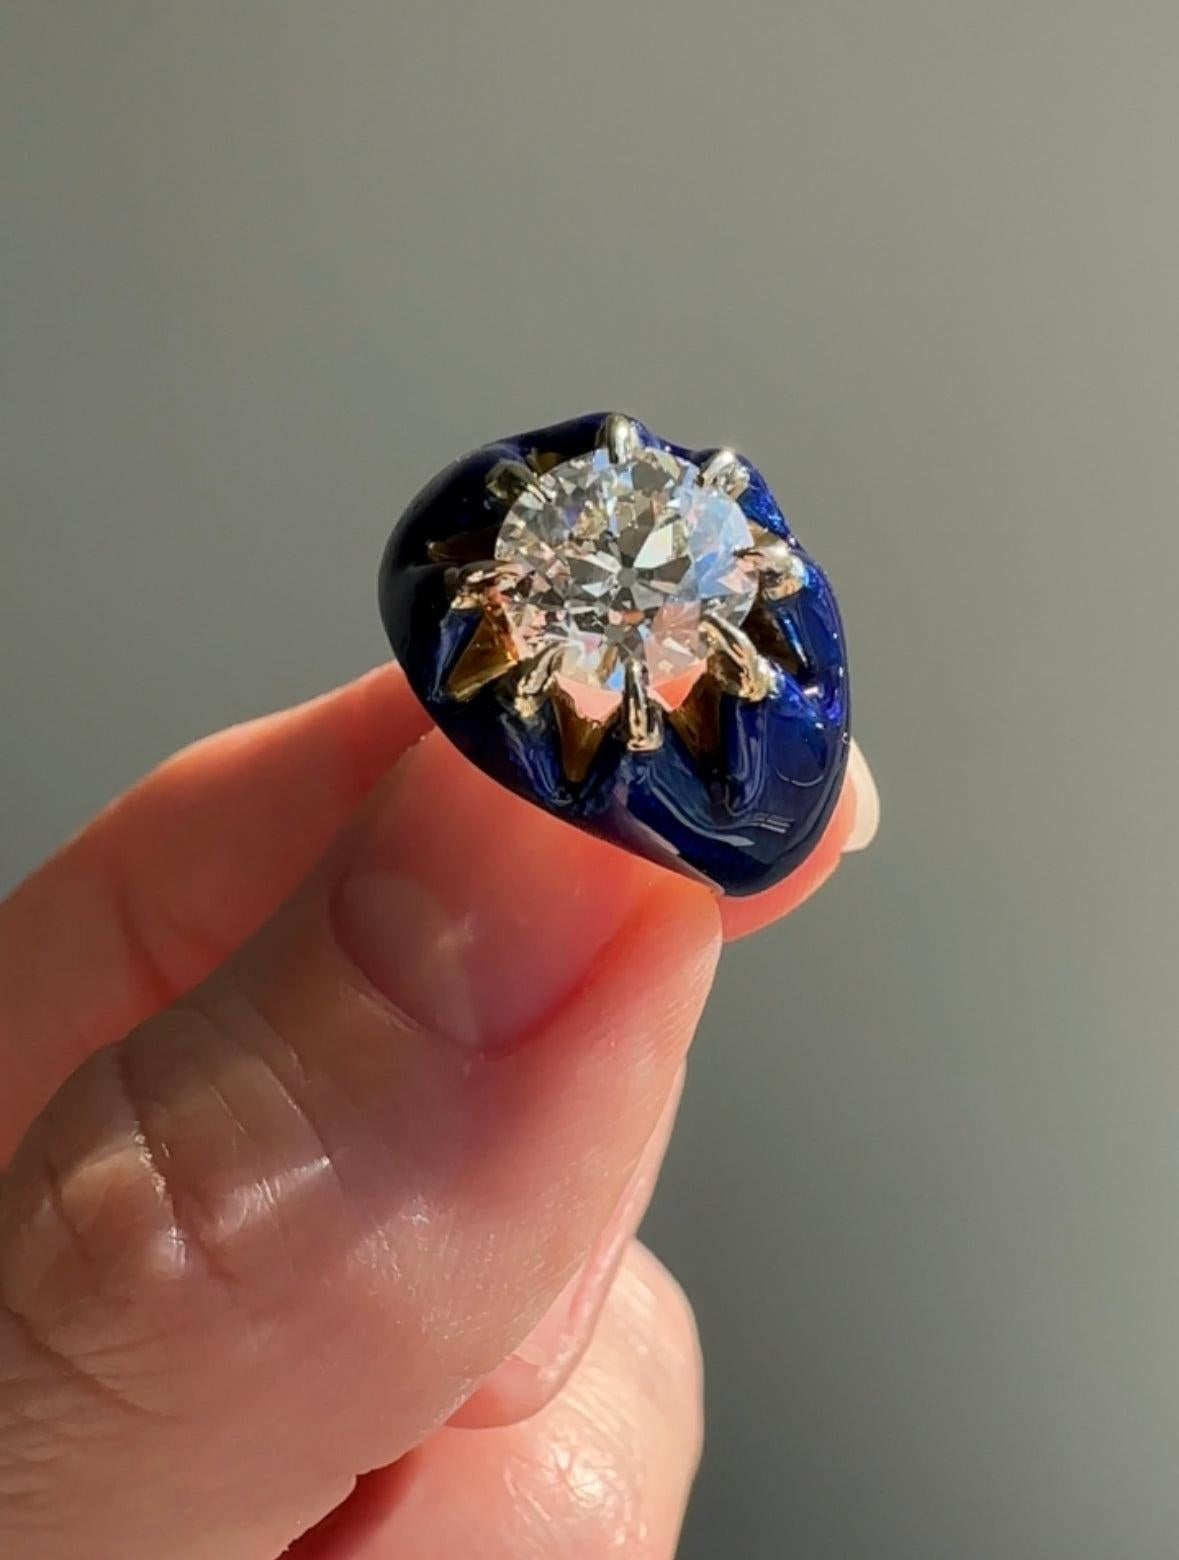 This striking and distinctive vintage ring boasts a gorgeous 2.04 carat old mine cut diamond, sparkling from within a buttercup setting adorned with with an incredible, bright cobalt blue guilloche enamel. Rendered in 18k gold, this ring is a